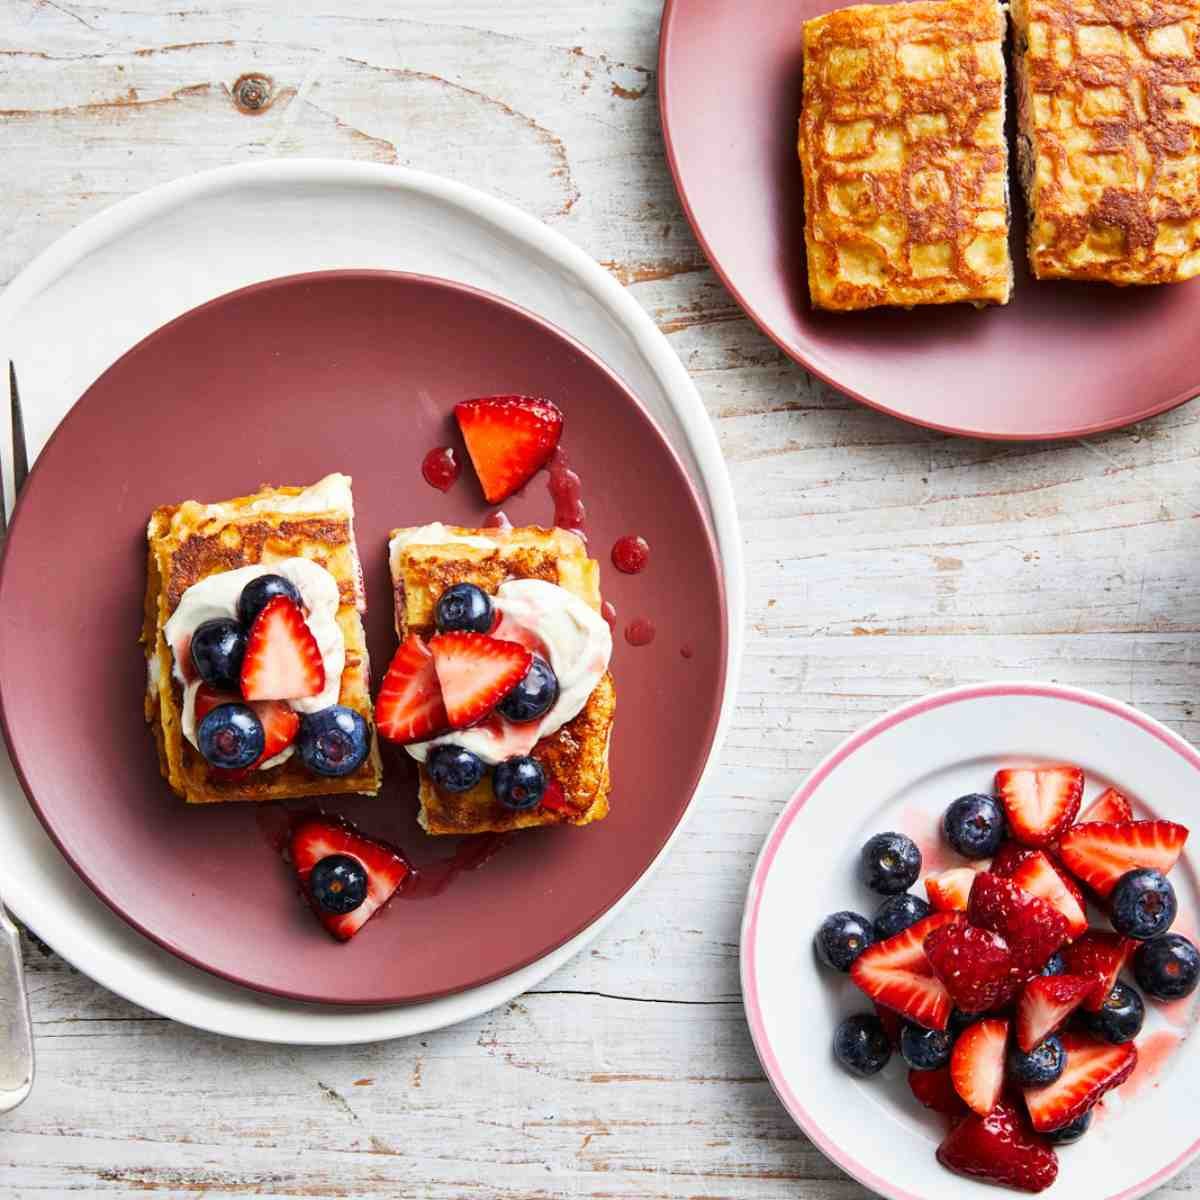 A stack of waffles topped with yoghurt and fruit on a pink plate. Next to the plate are more berries, and waffles.